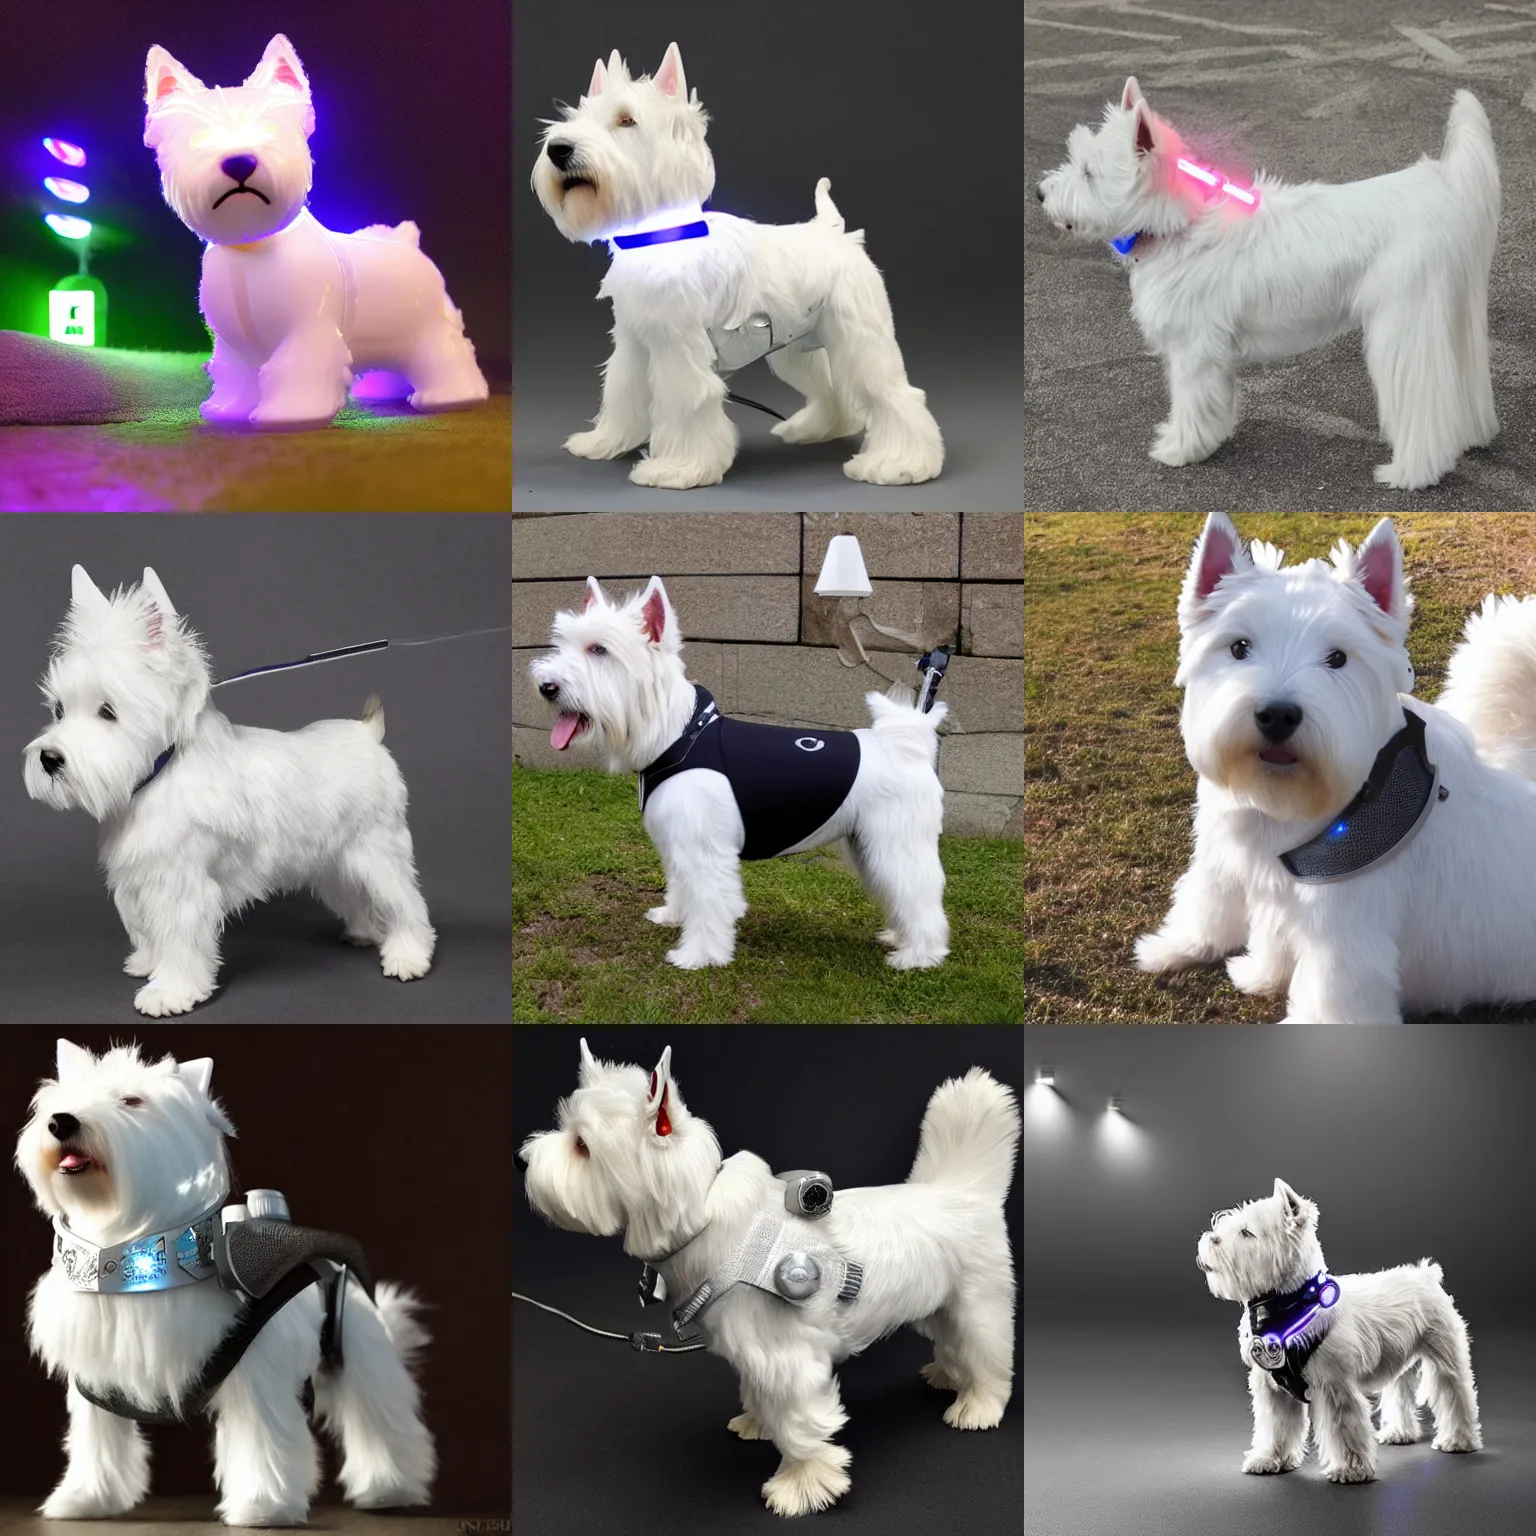 Prompt: a west highland white terrier anime sidekick with futuristic, led - lit armour and a canon mounted on his back